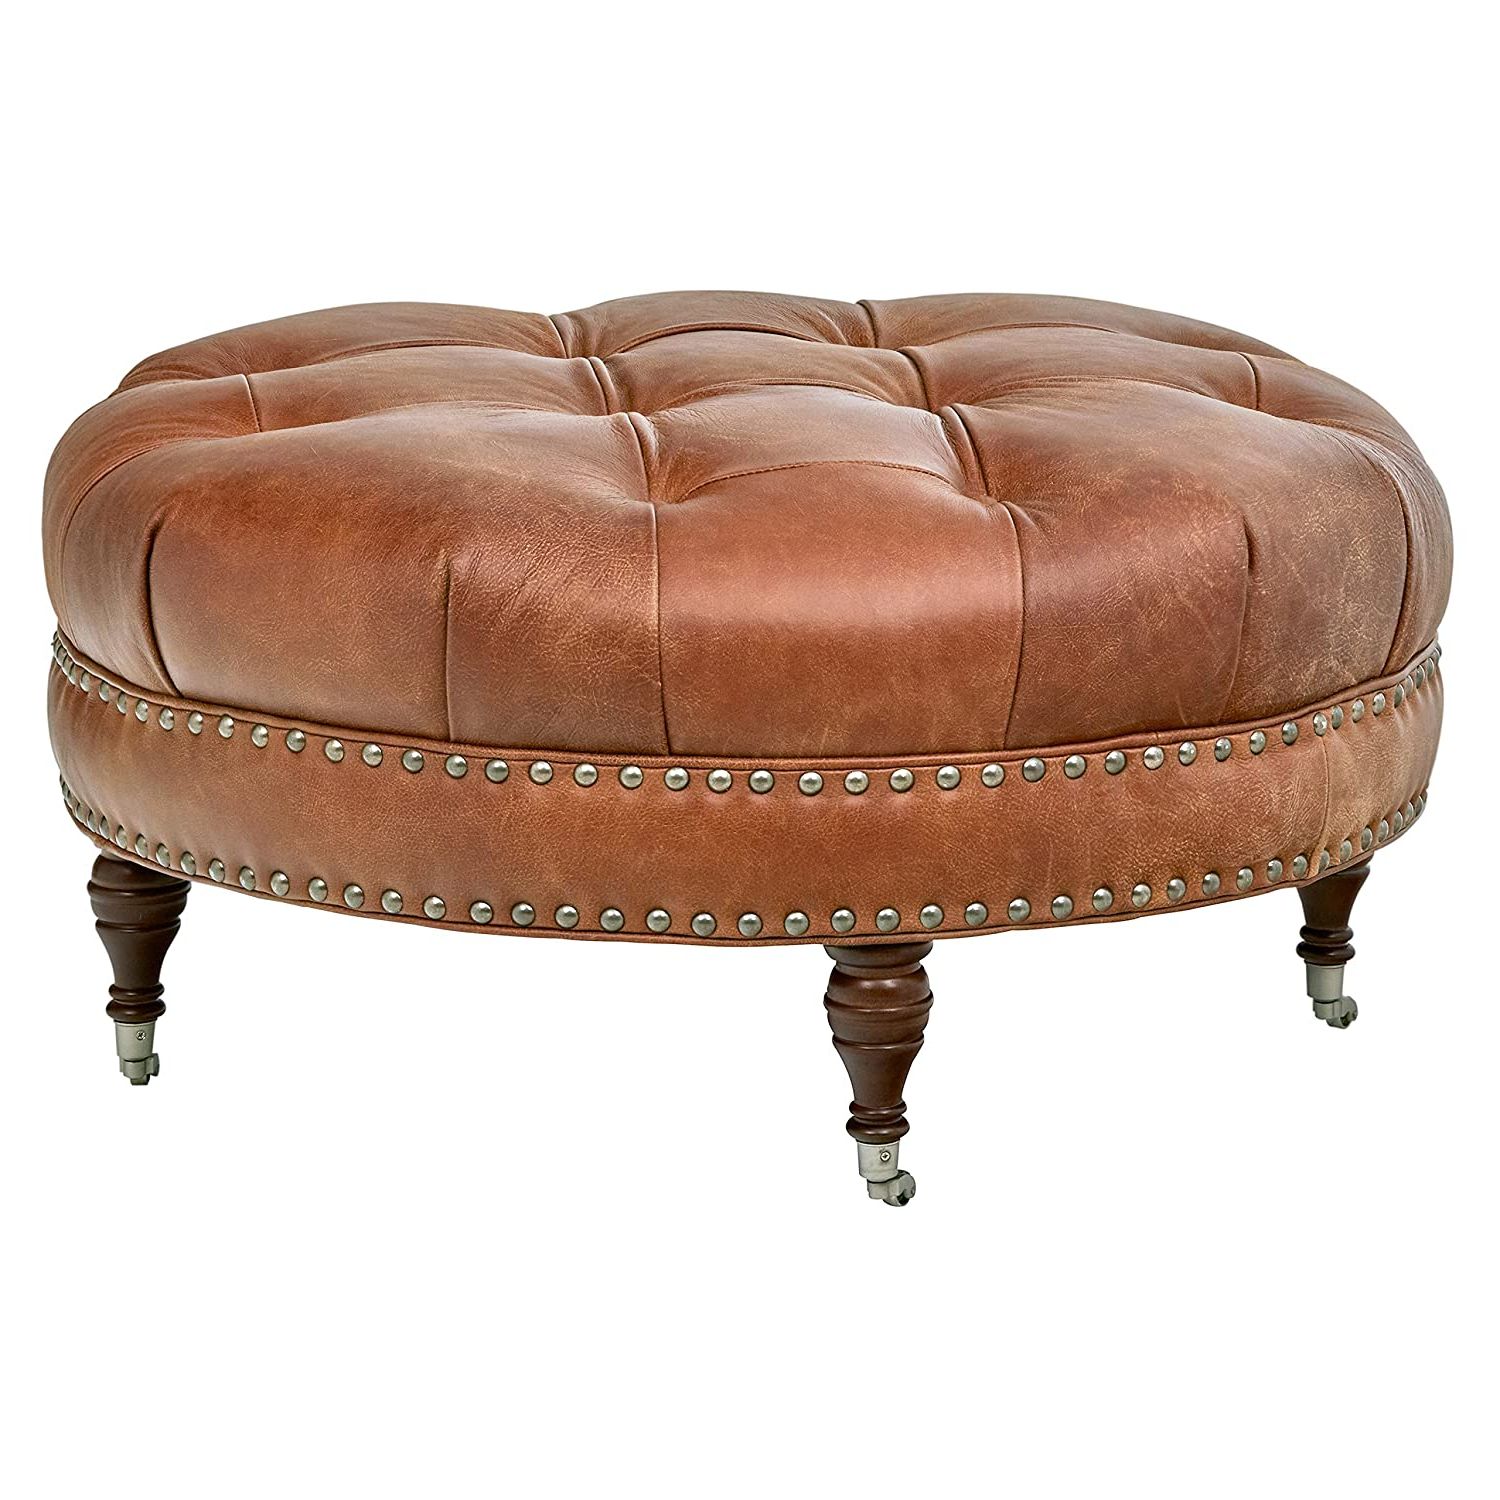 Brown And Ivory Leather Hide Round Ottomans For Recent Best Leather Round Pouf Ottoman – Your House (View 3 of 10)